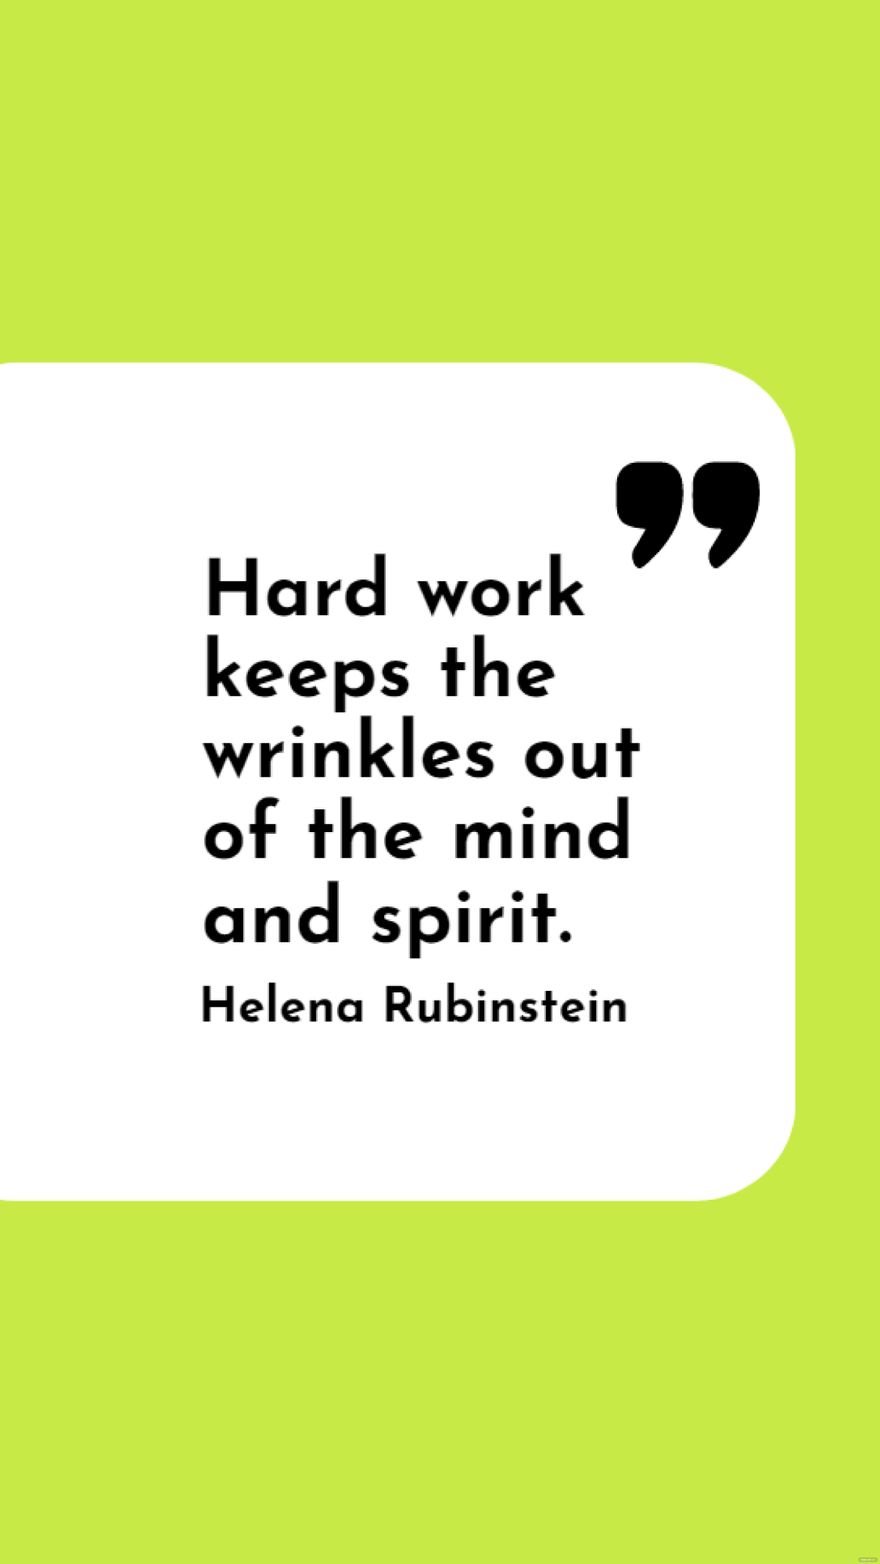 Helena Rubinstein - Hard work keeps the wrinkles out of the mind and spirit. in JPG